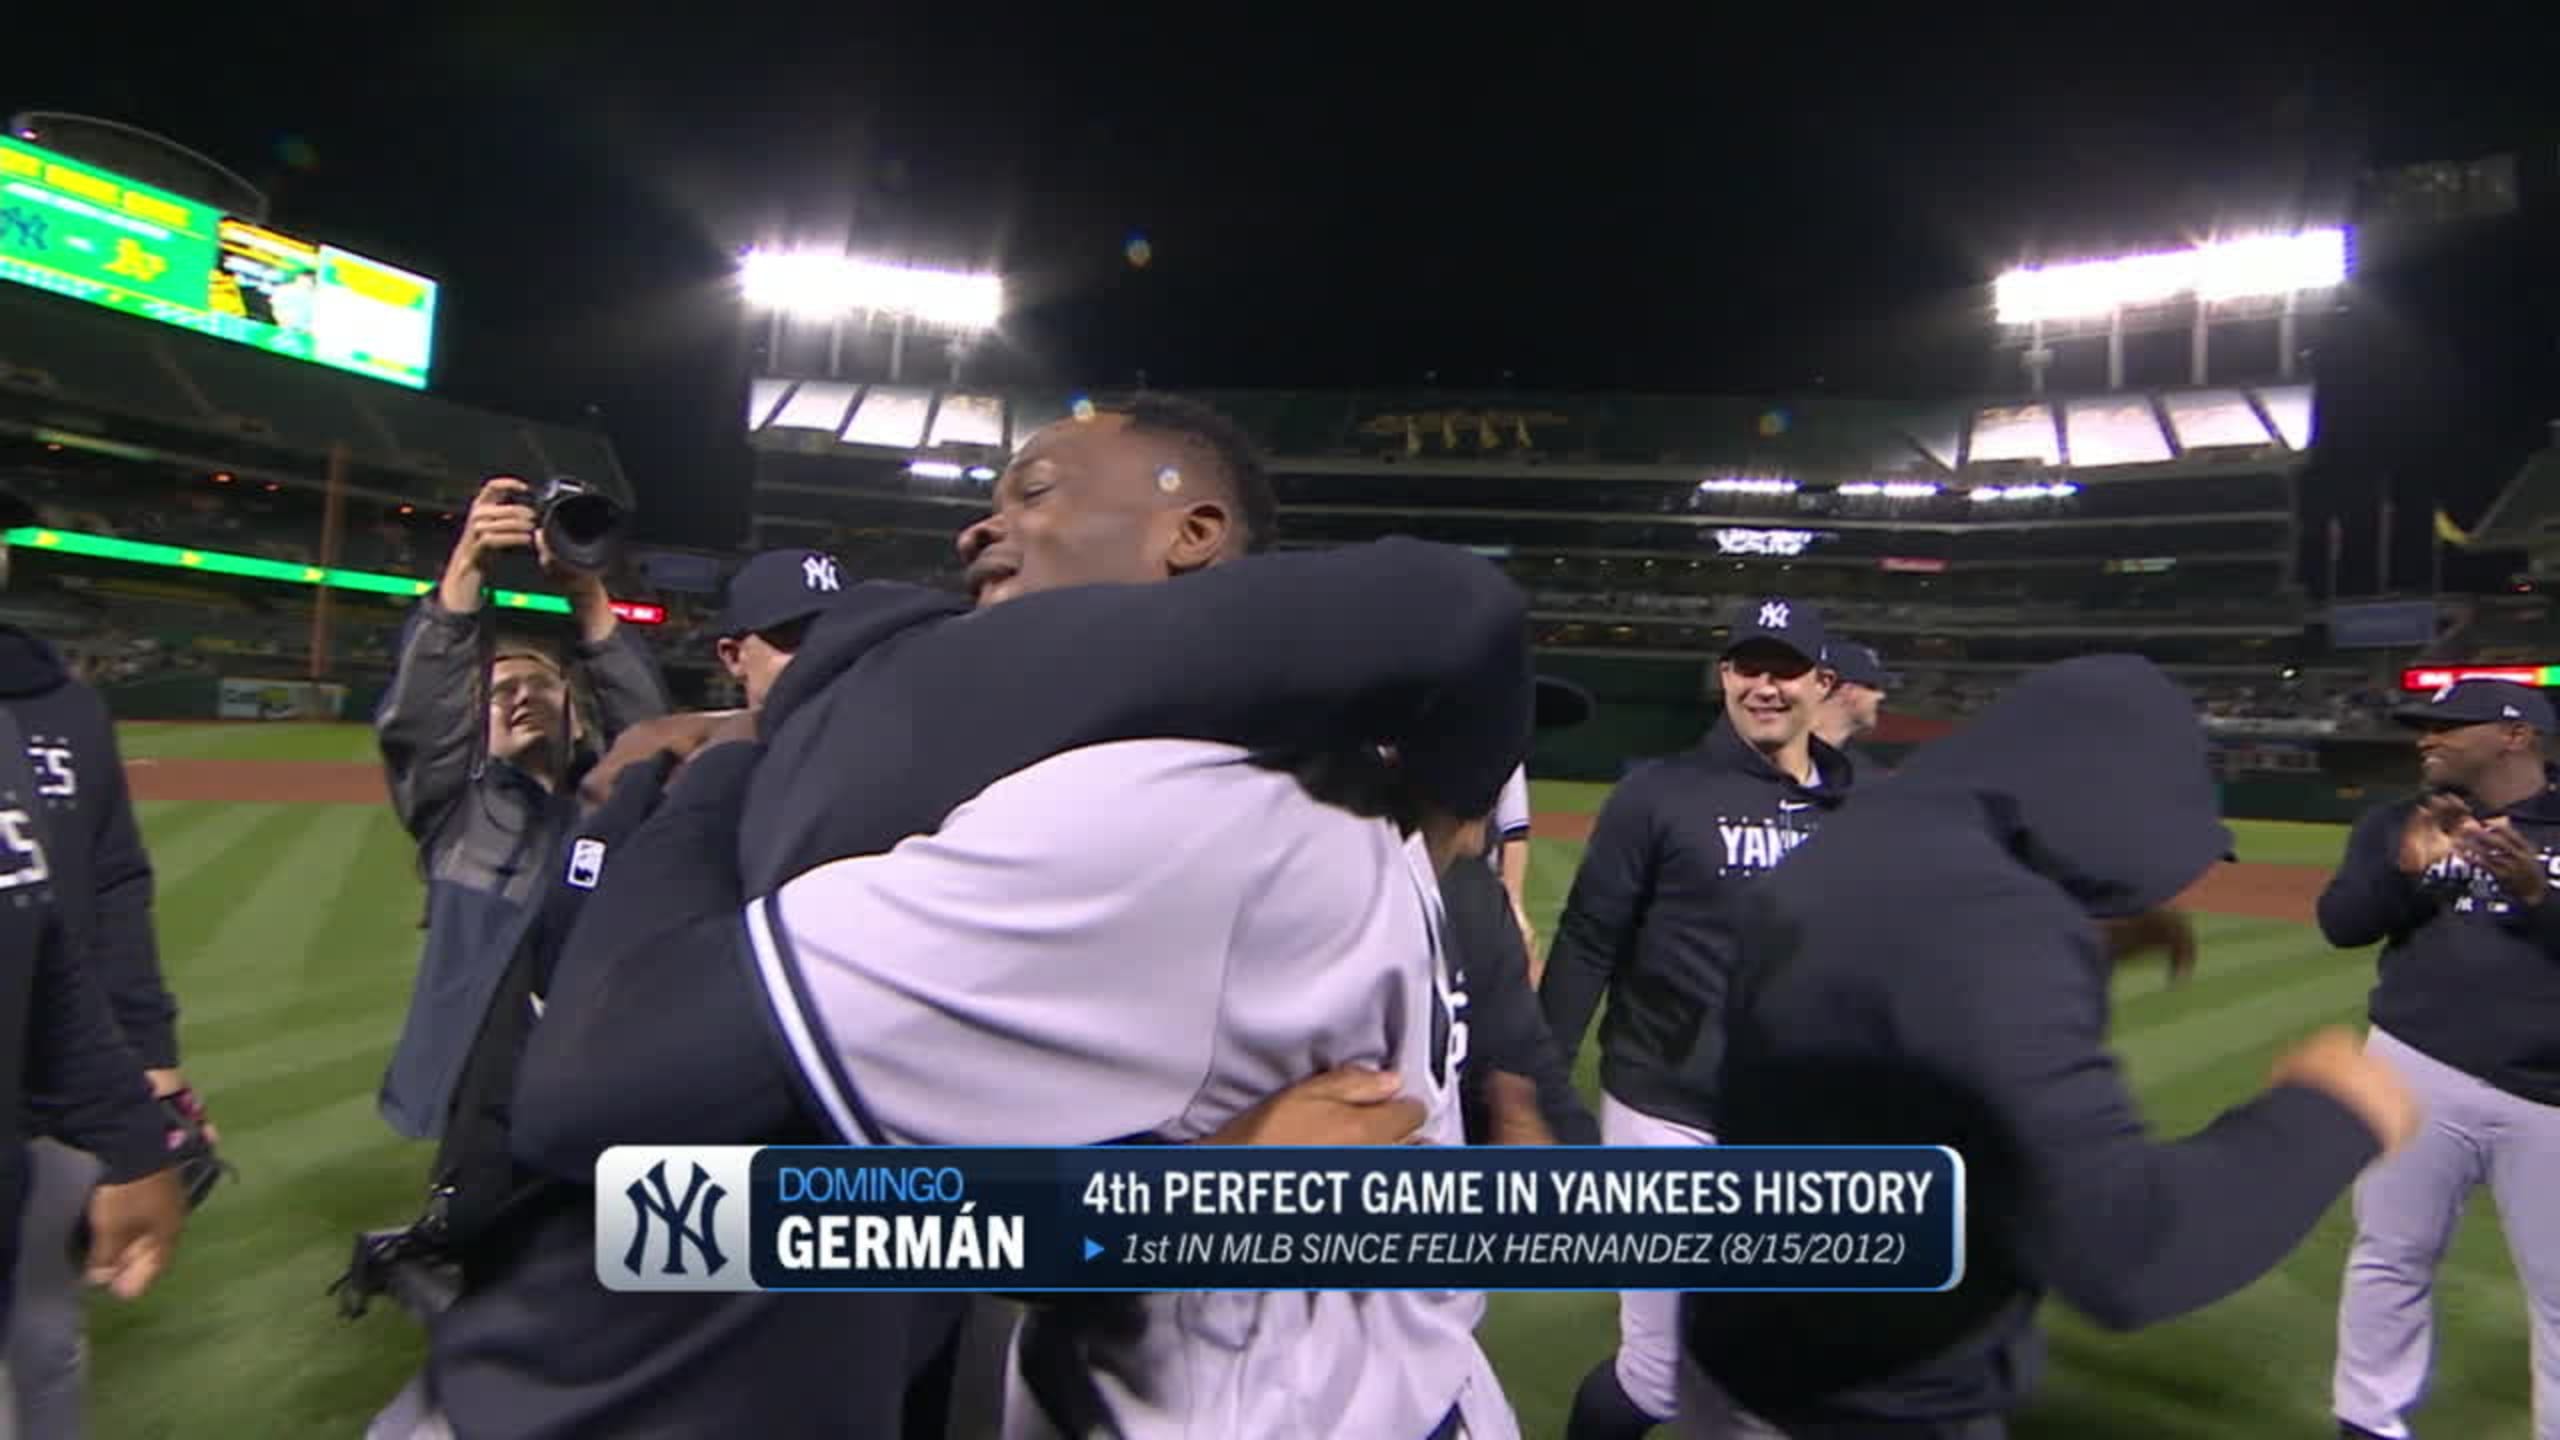 After perfect game, heavy-hearted Domingo German took it easy